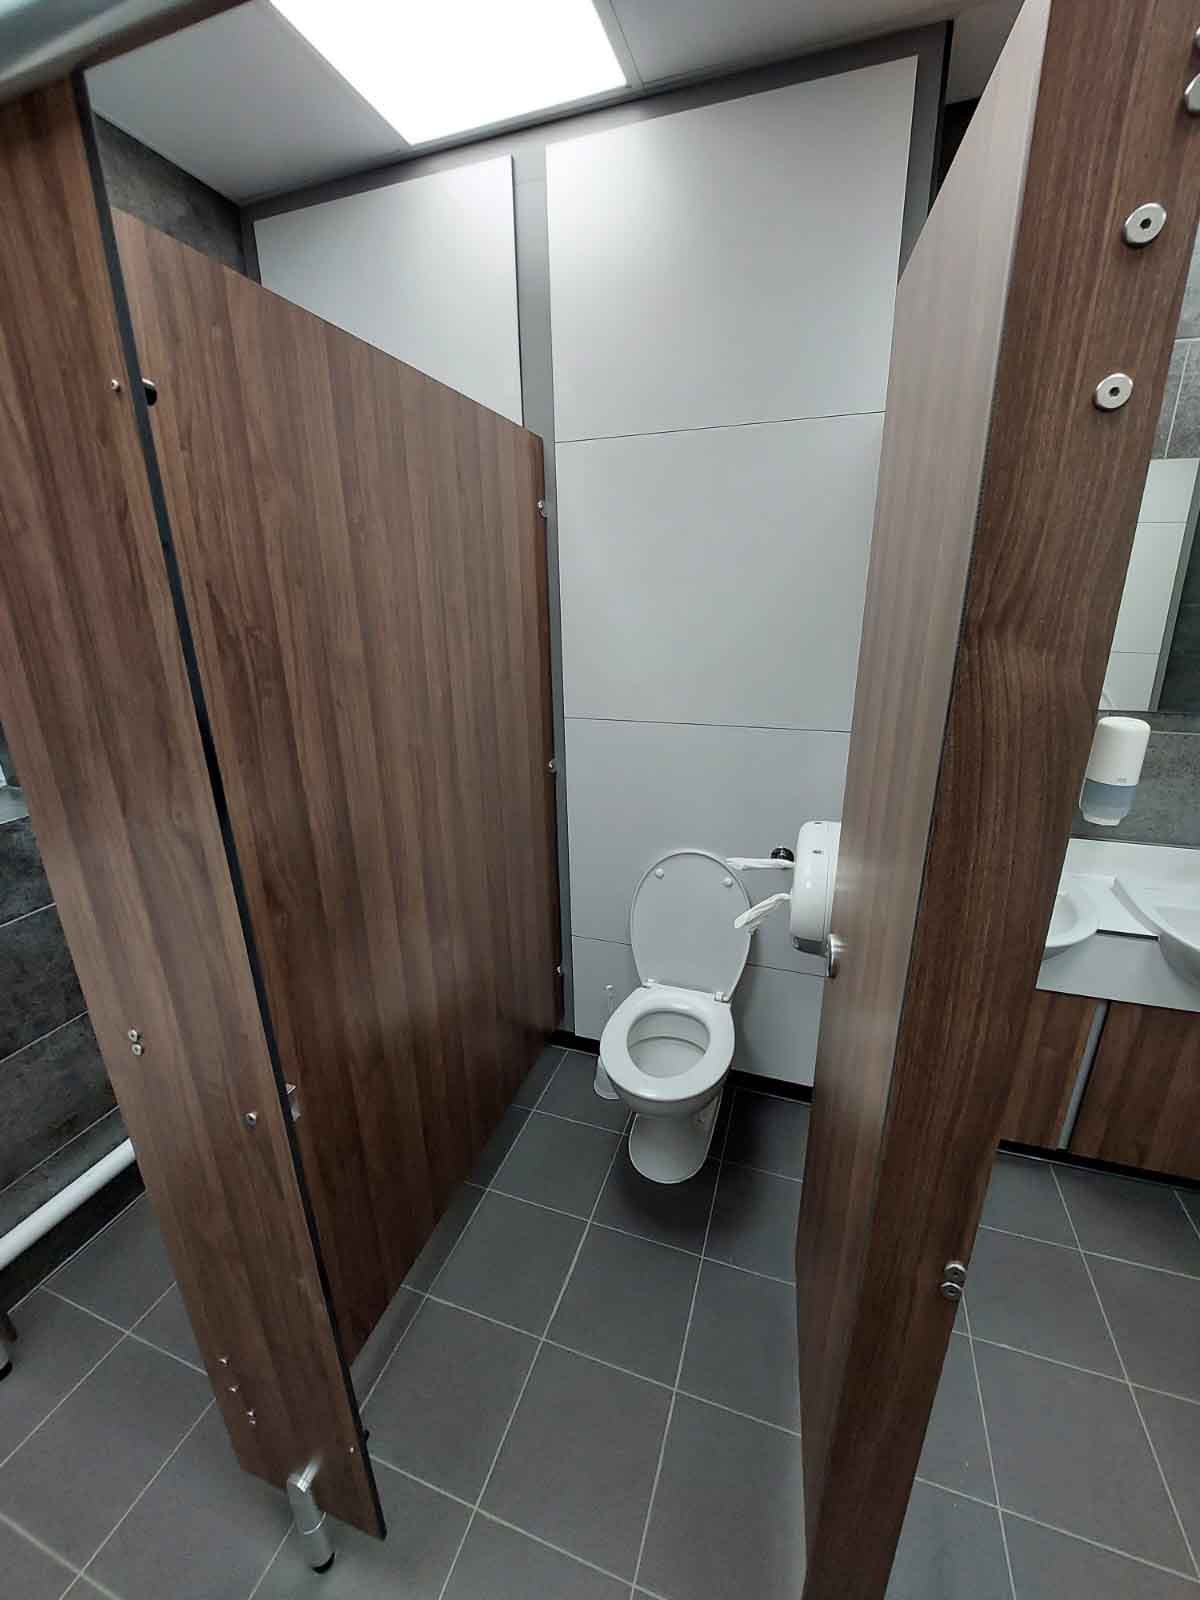 toilet cubicle with dark brown woodgrain cubicles, white full heigh duct panels and grey concrete tiling at kia oval.jpg